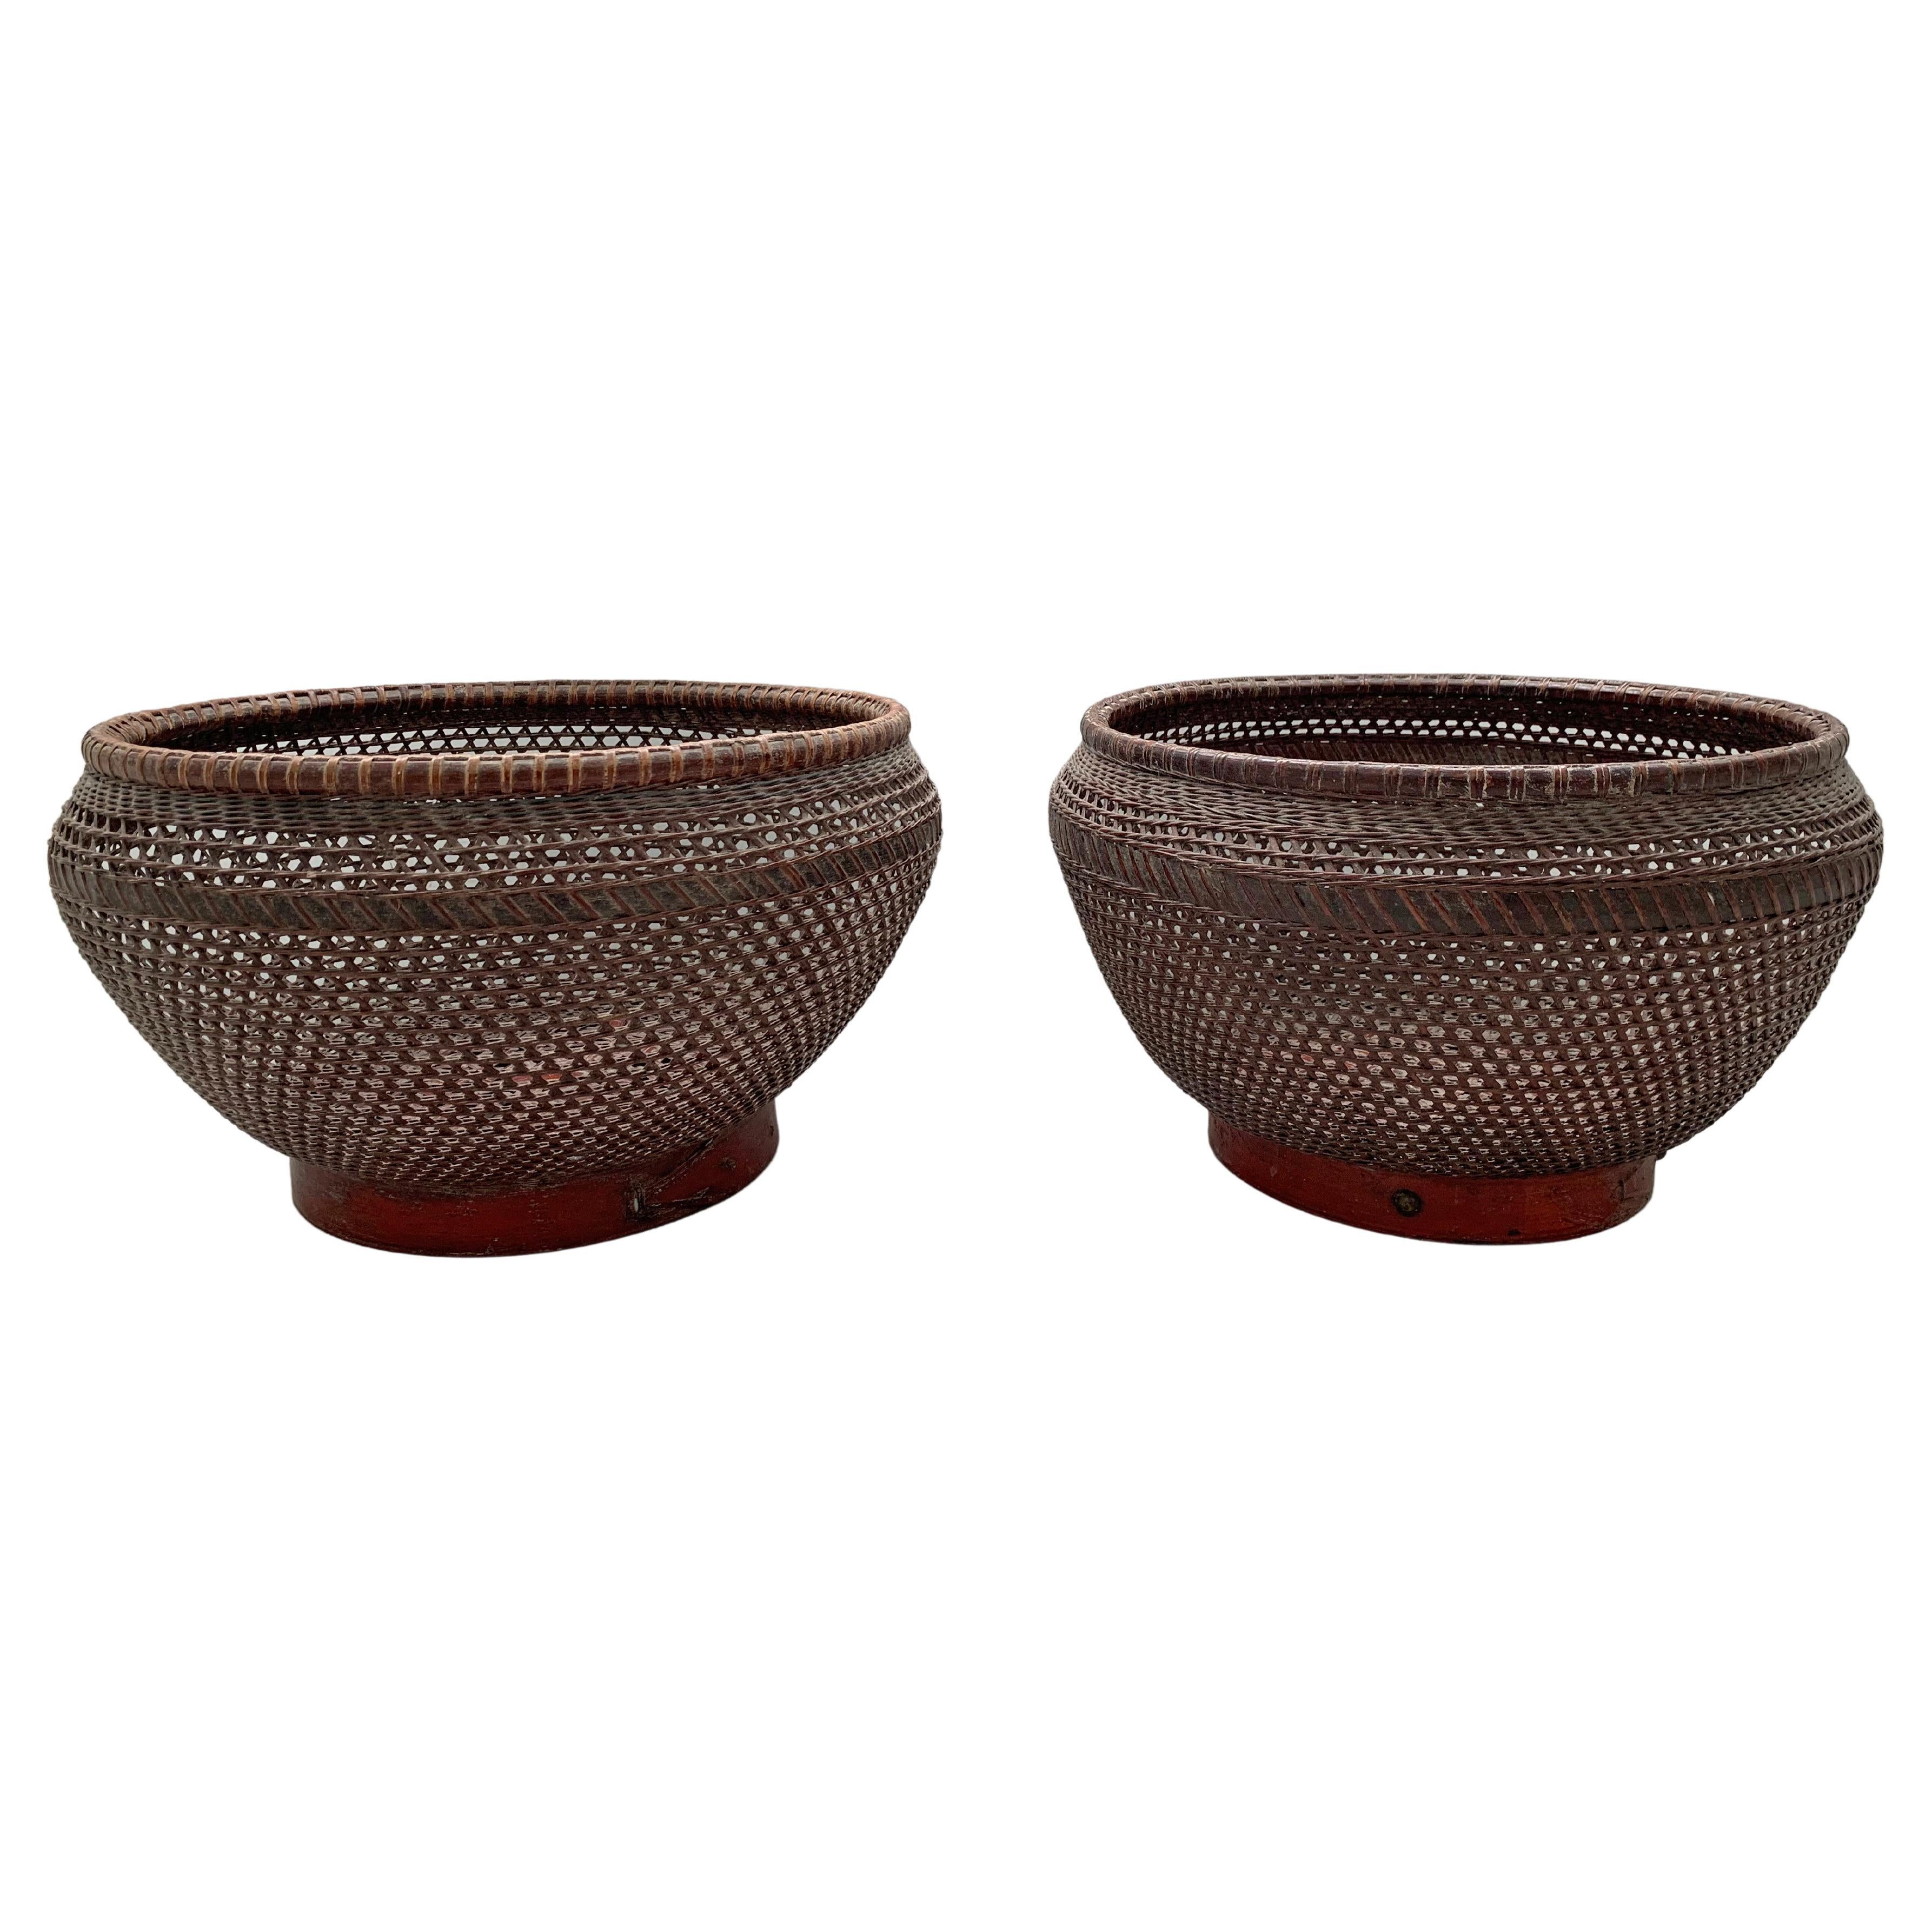 Chinese Basket Pair Hand-Woven Rattan with Red Wood Base, Early 20th Century For Sale